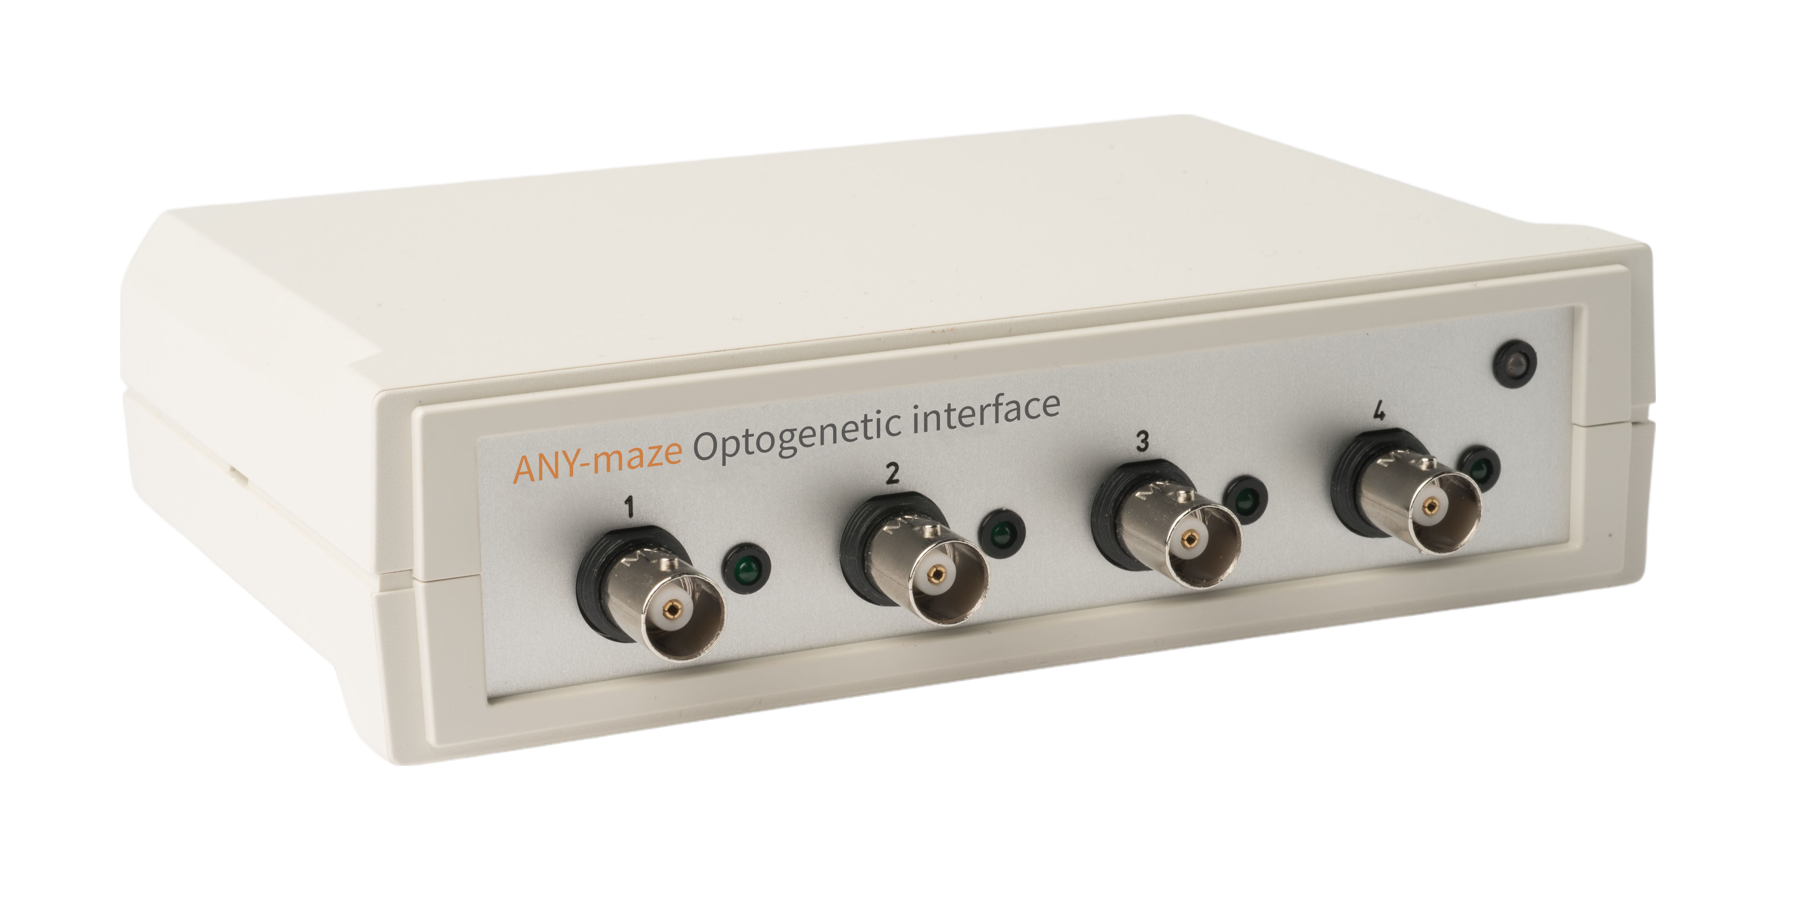 The ANY-maze Optogenetic interface picture